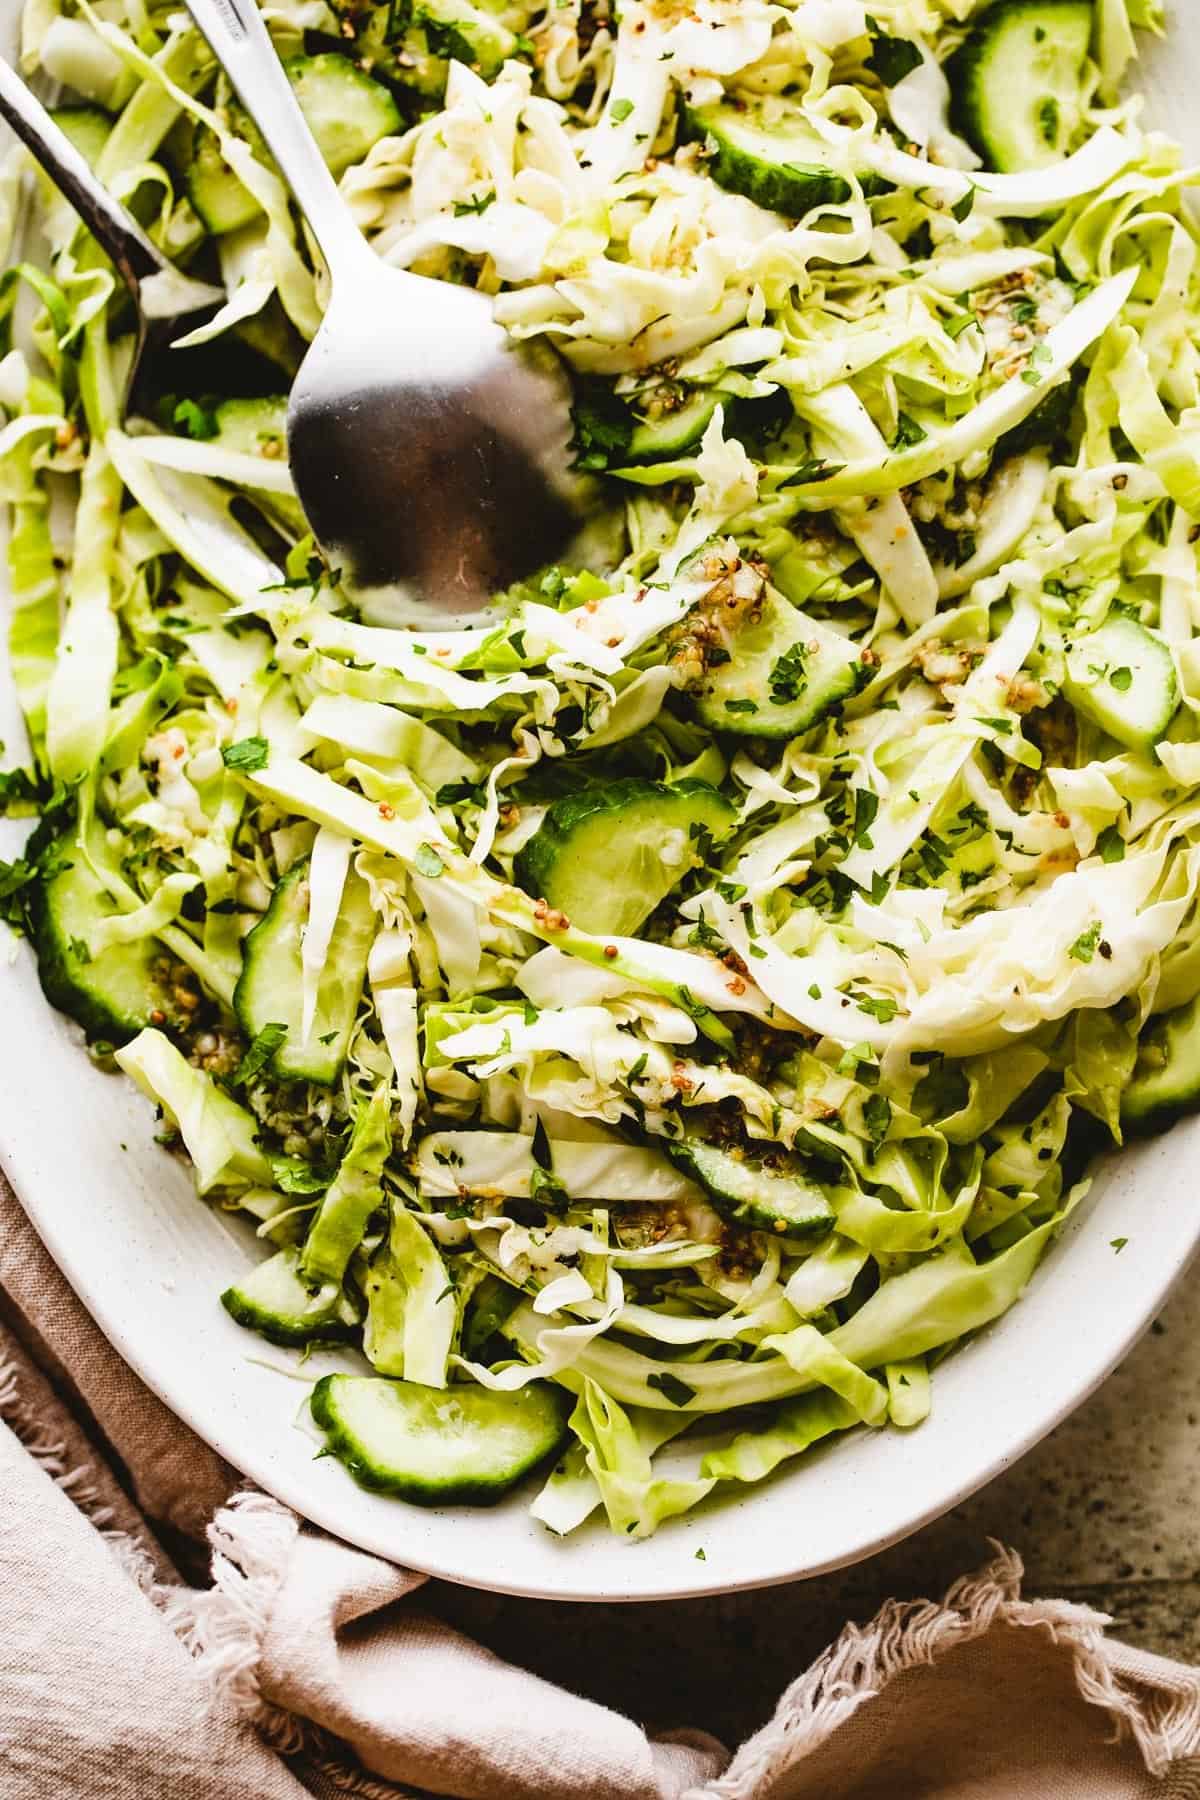 Cabbage Cucumber Salad served on an oblong serving plate with a large fork and spoon placed in the center of the salad.